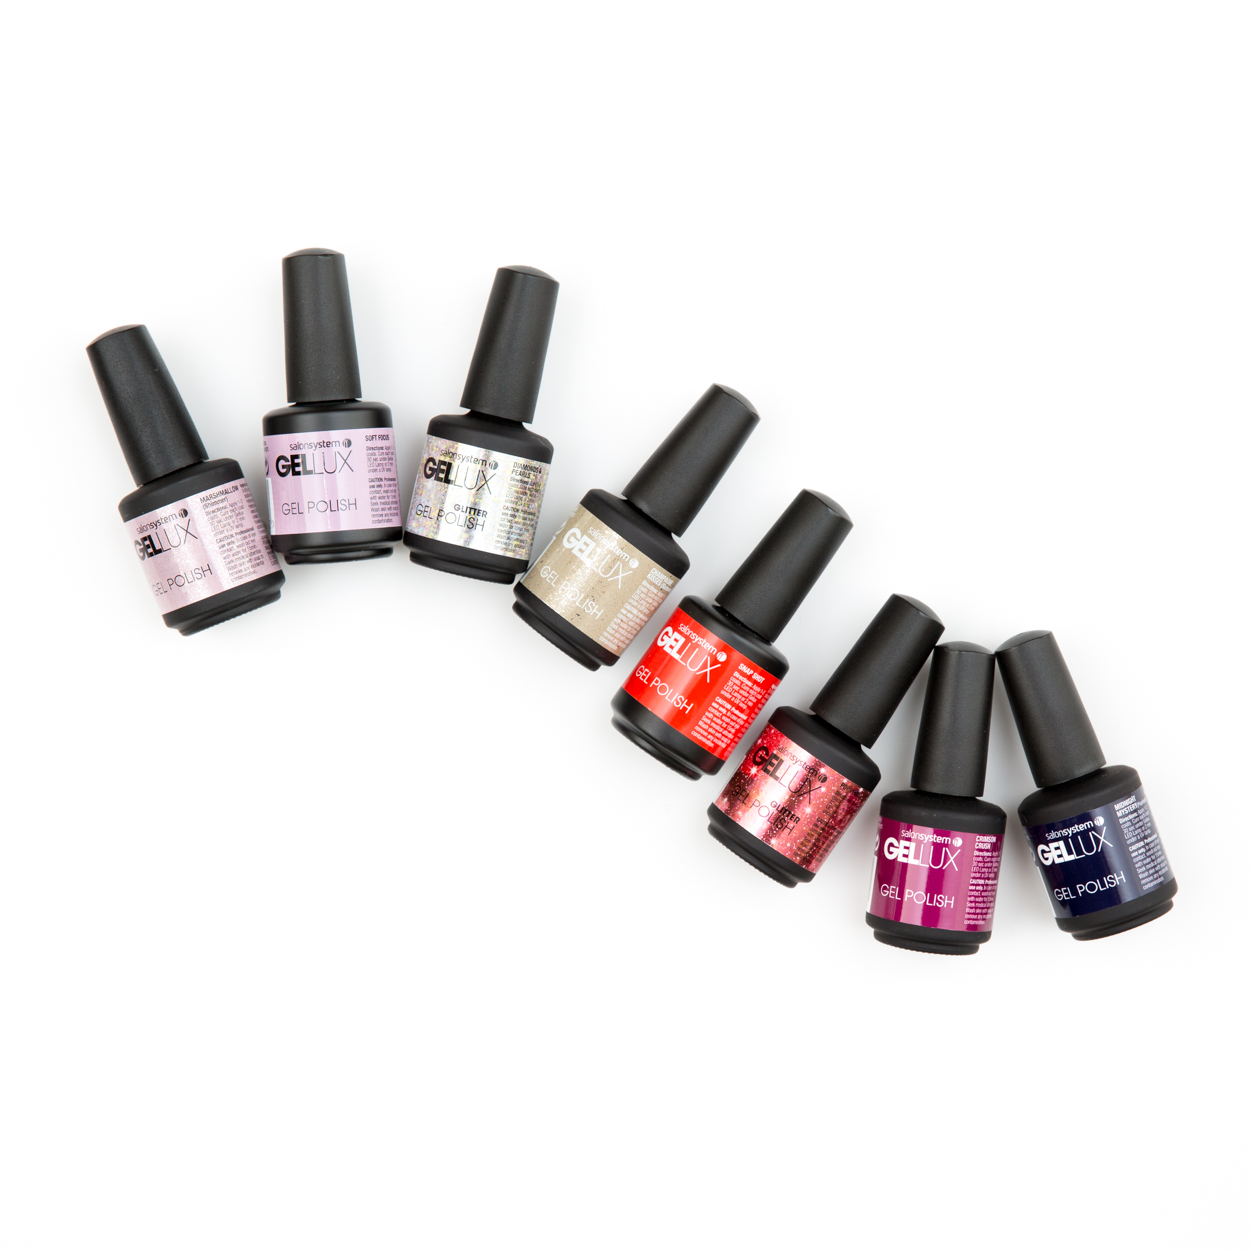 Gellux core collection